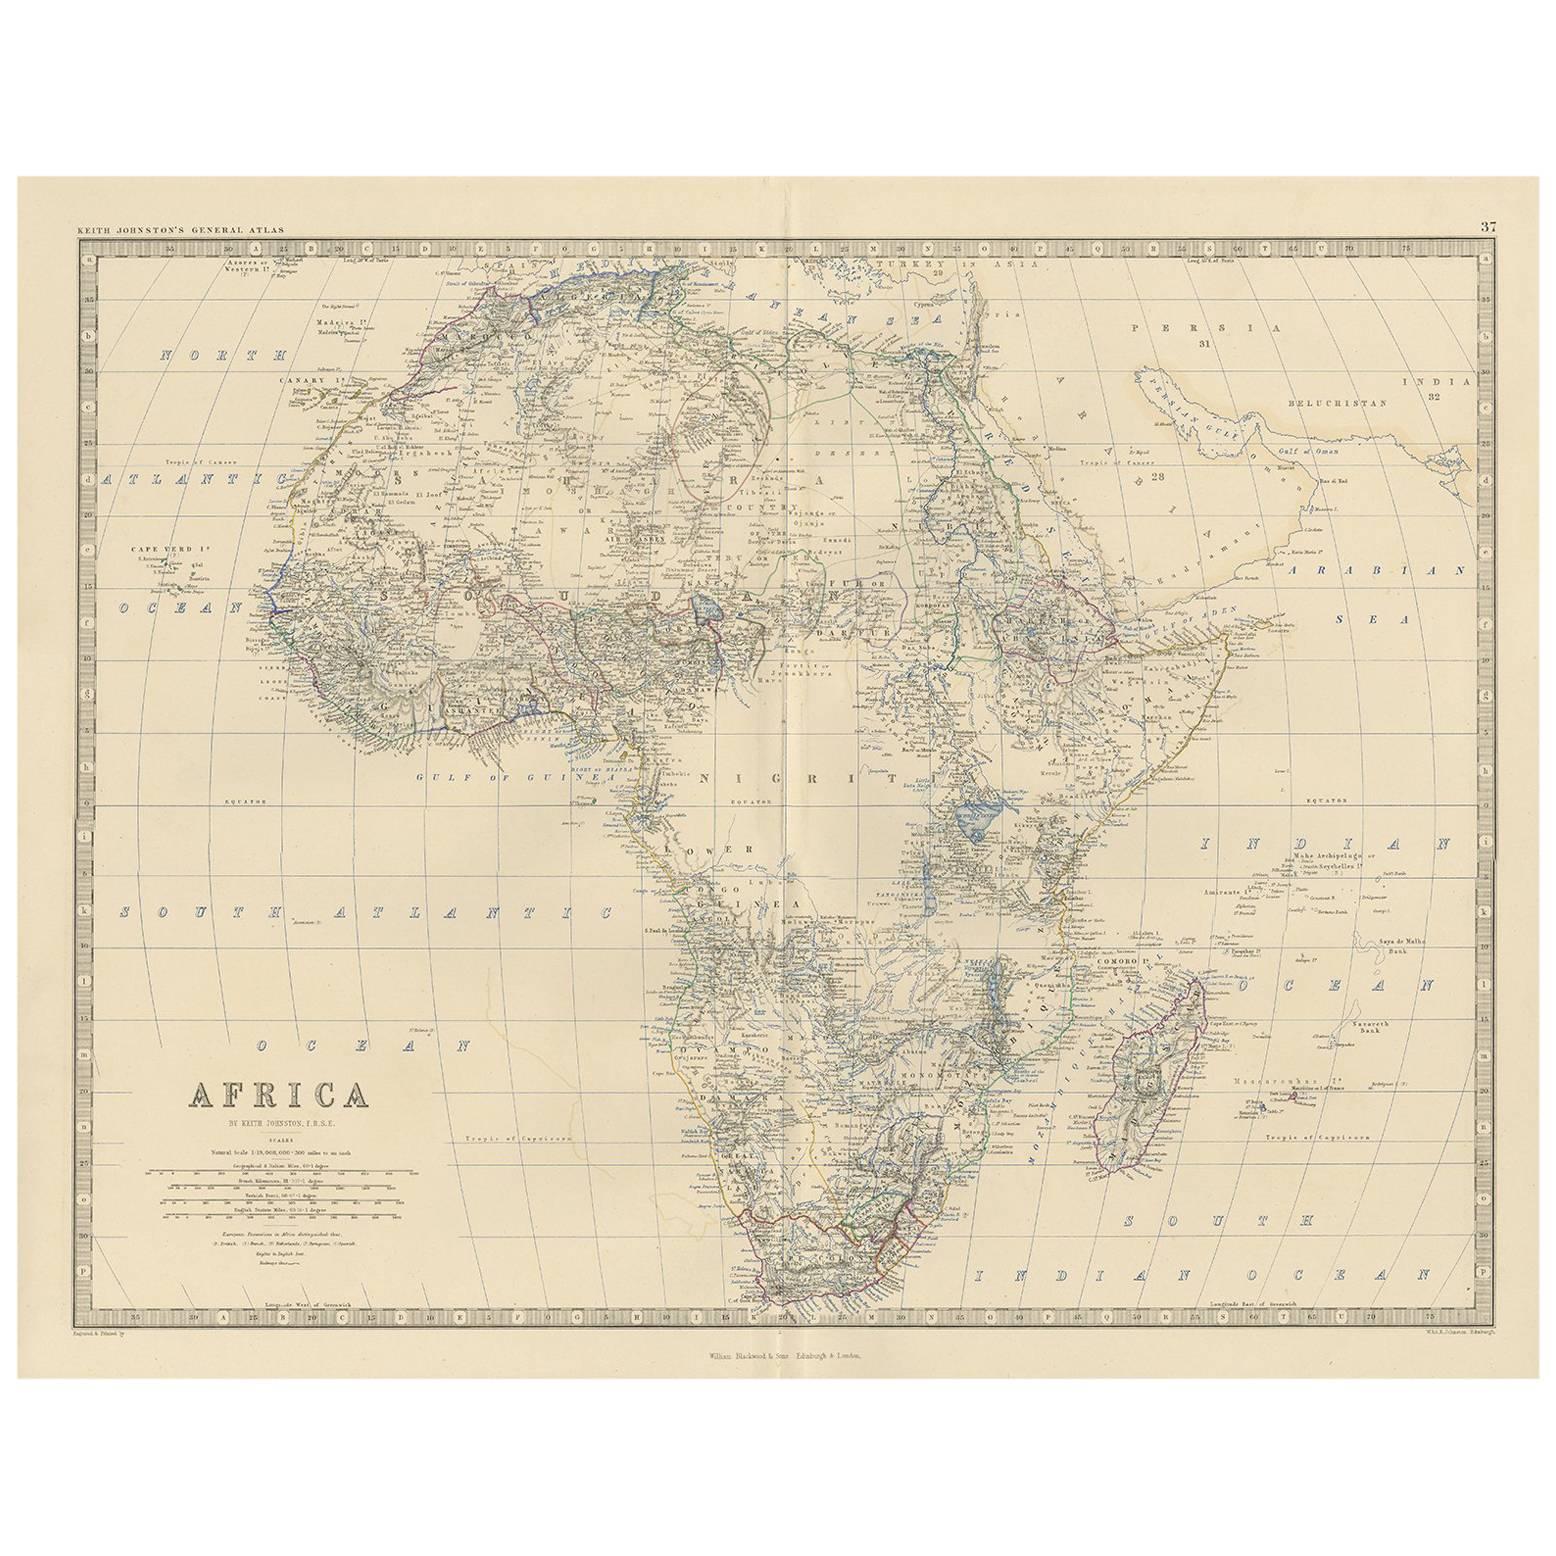 Antique Map of Africa by A.K. Johnston, 1865